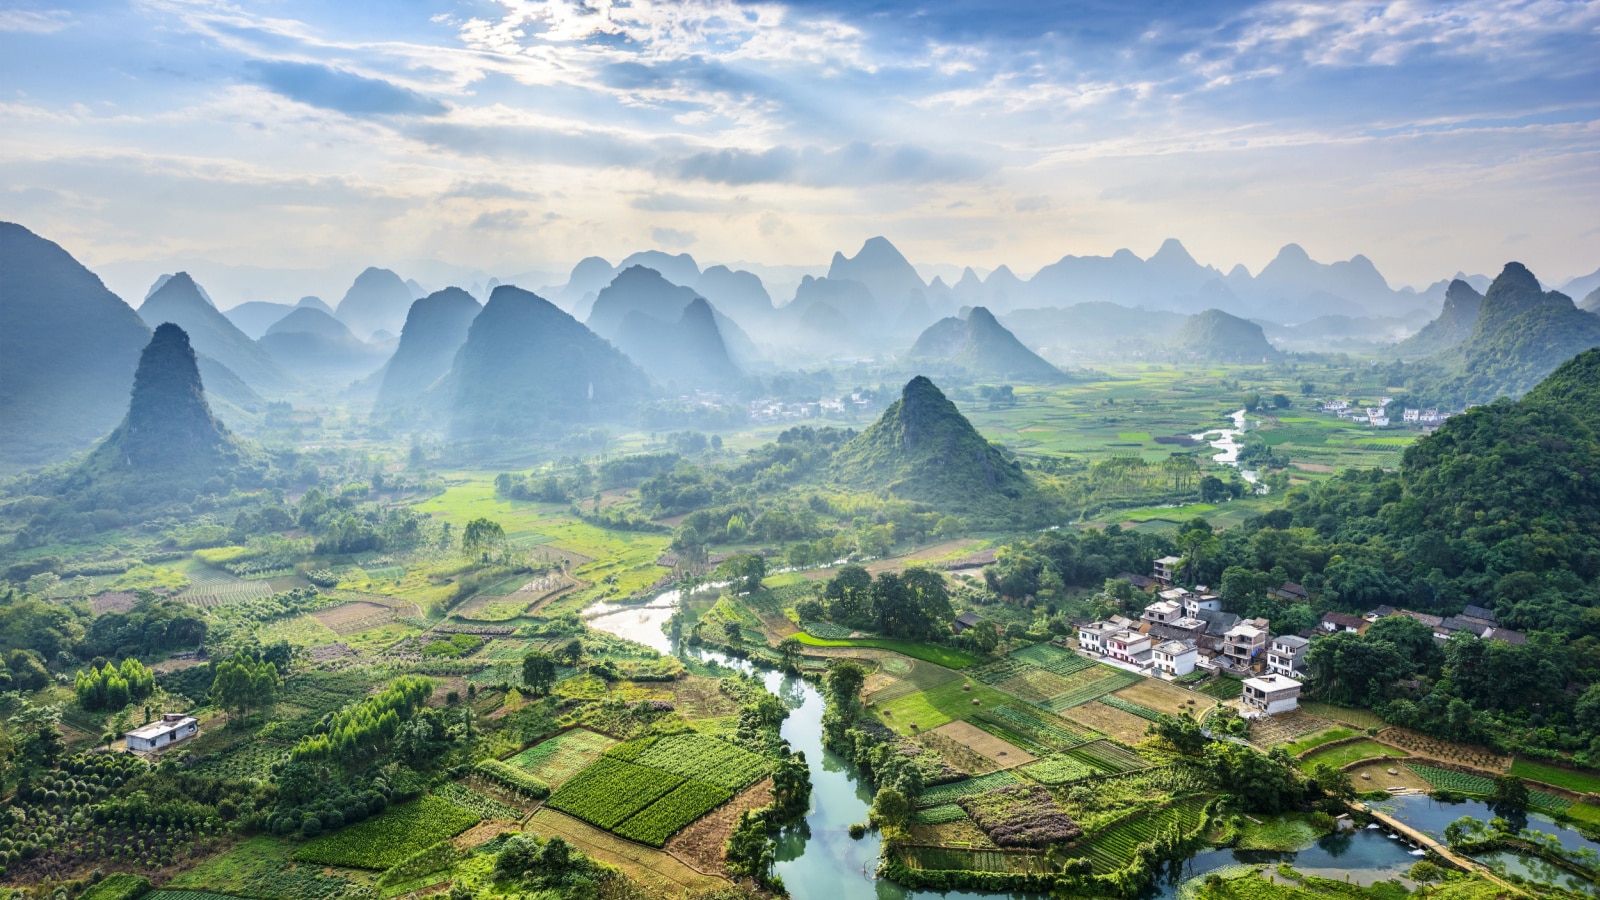 Landscape of Guilin, Li River and Karst mountains. Located near Yangshuo County, Guilin City, Guangxi Province, China.